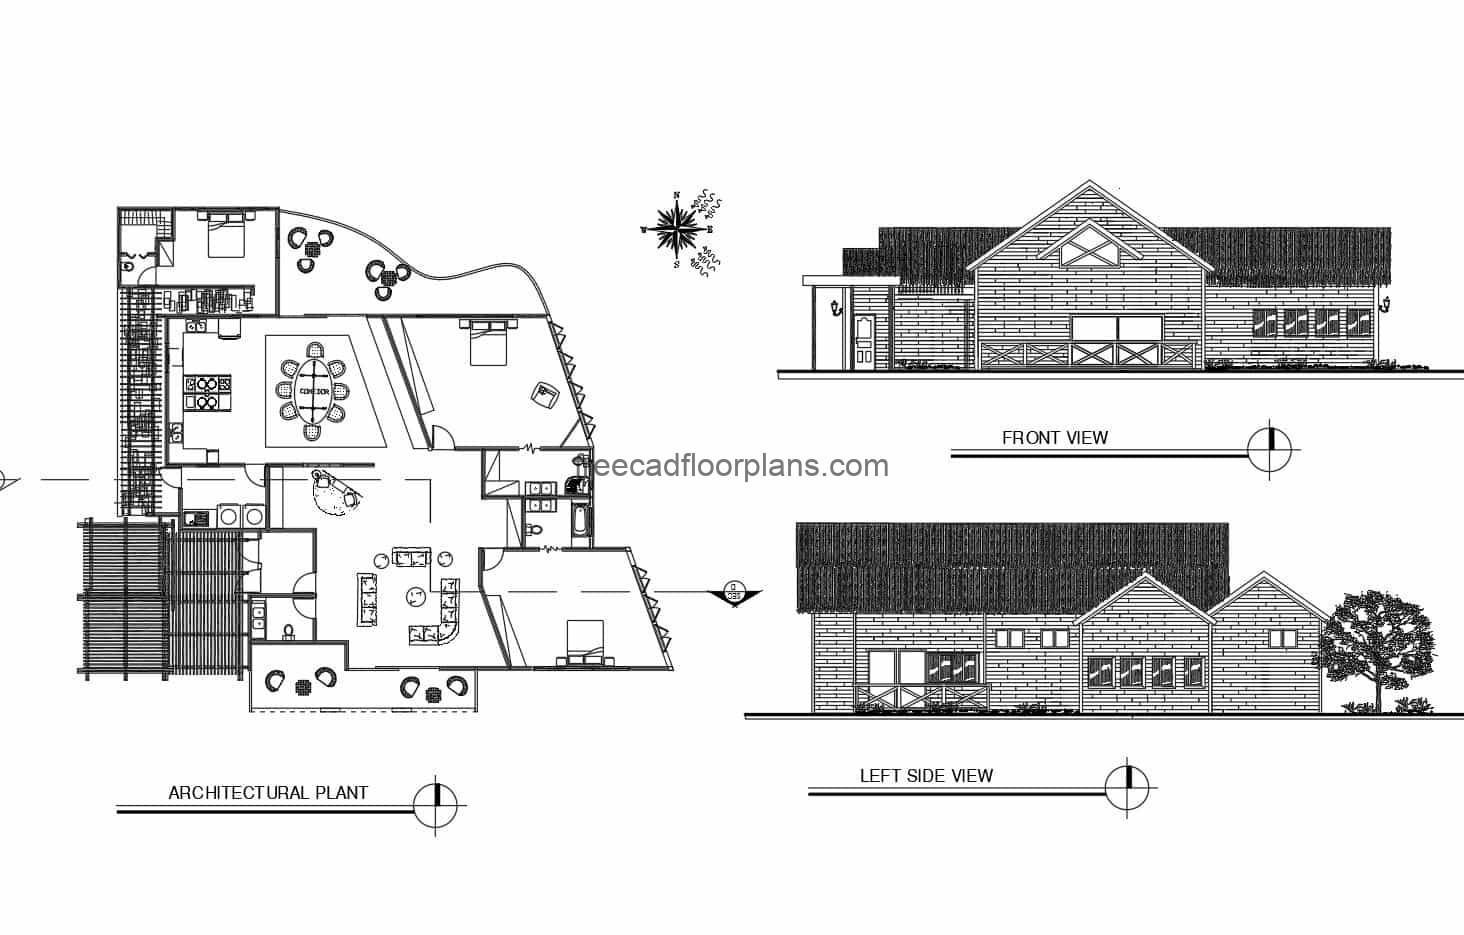 One-level country house plan for free download in DWG format of autocad, architectural plan, dimensions and elevations.